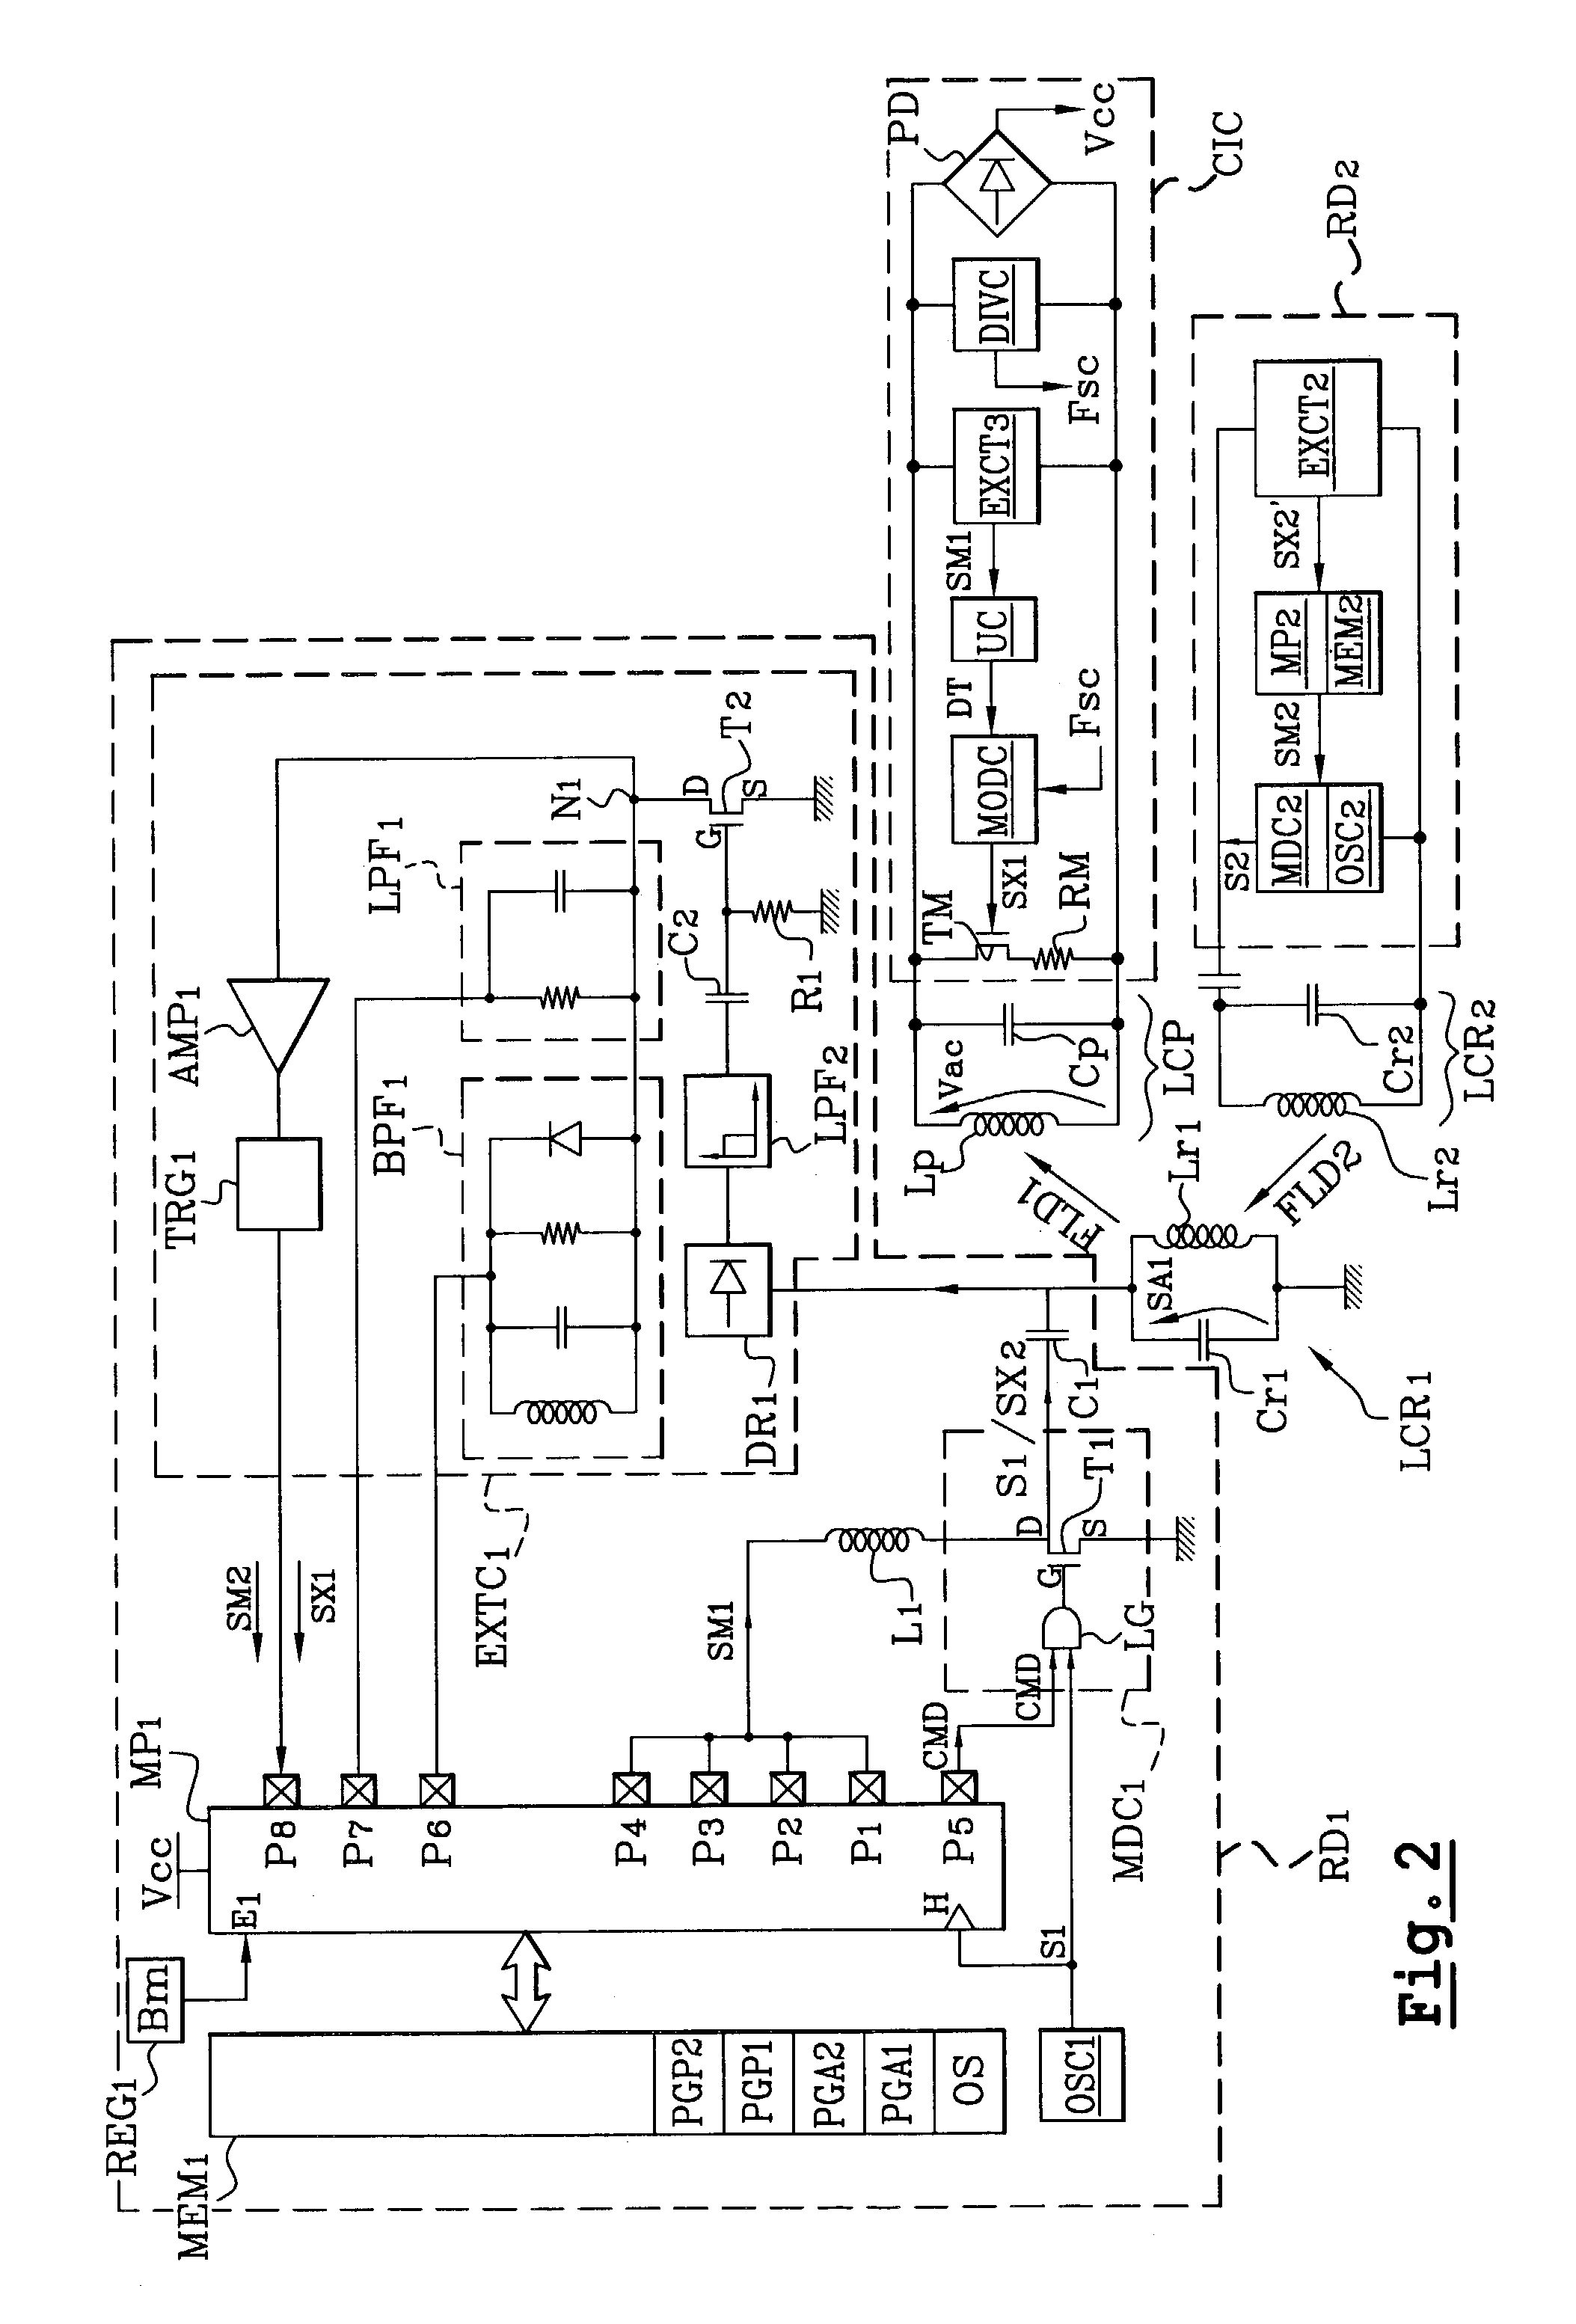 Contactless integrated circuit reader